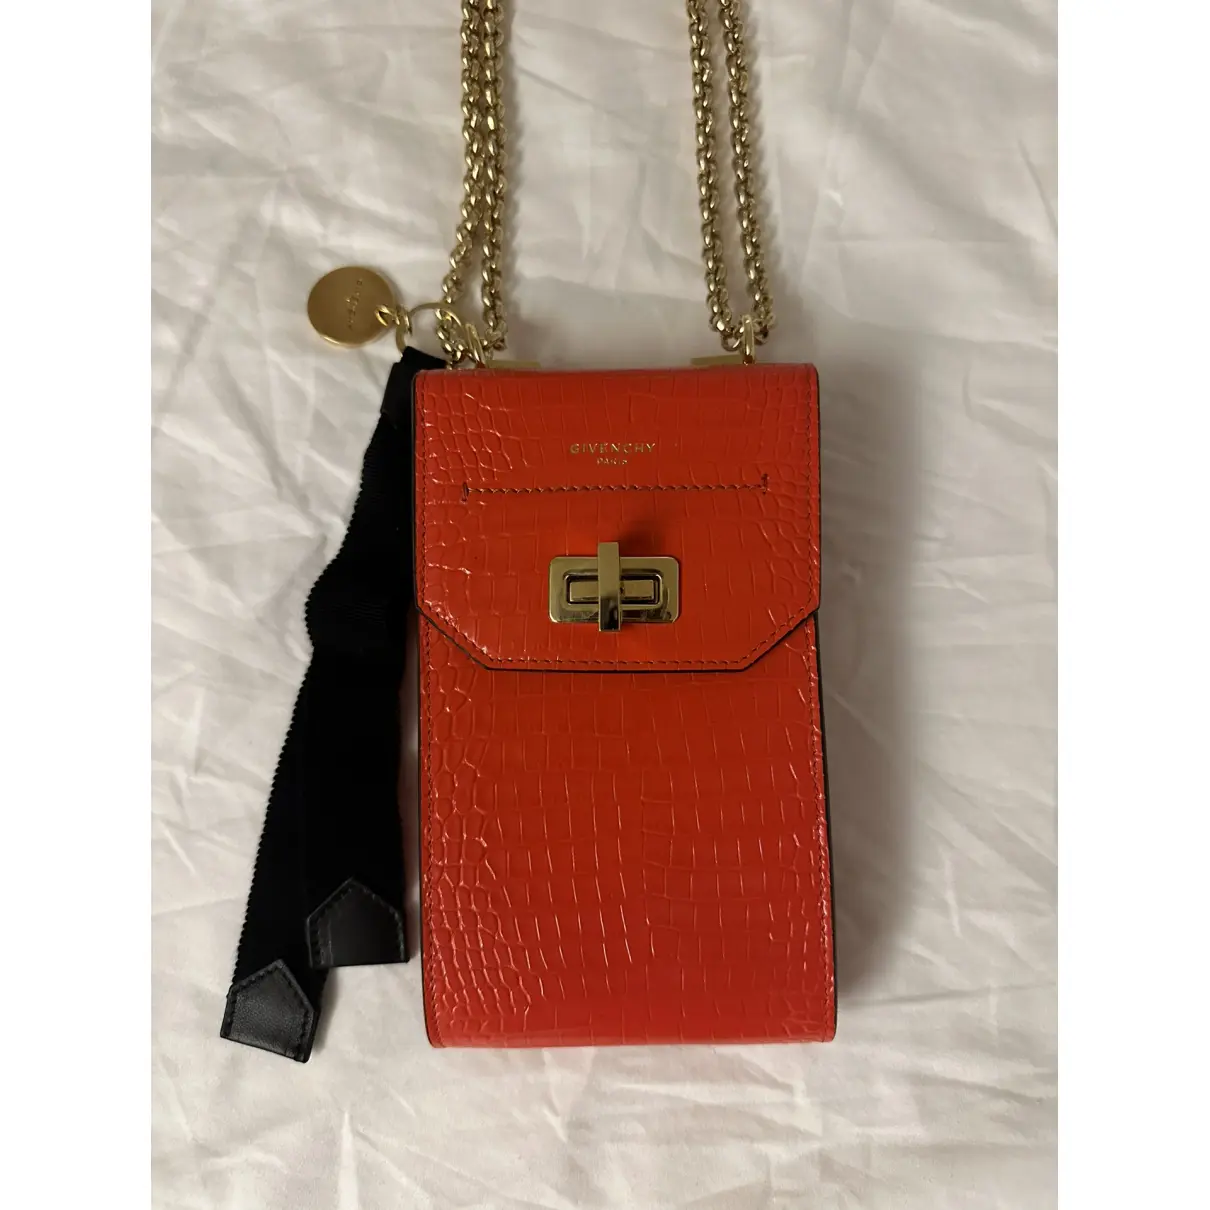 Buy Givenchy Patent leather mini bag online